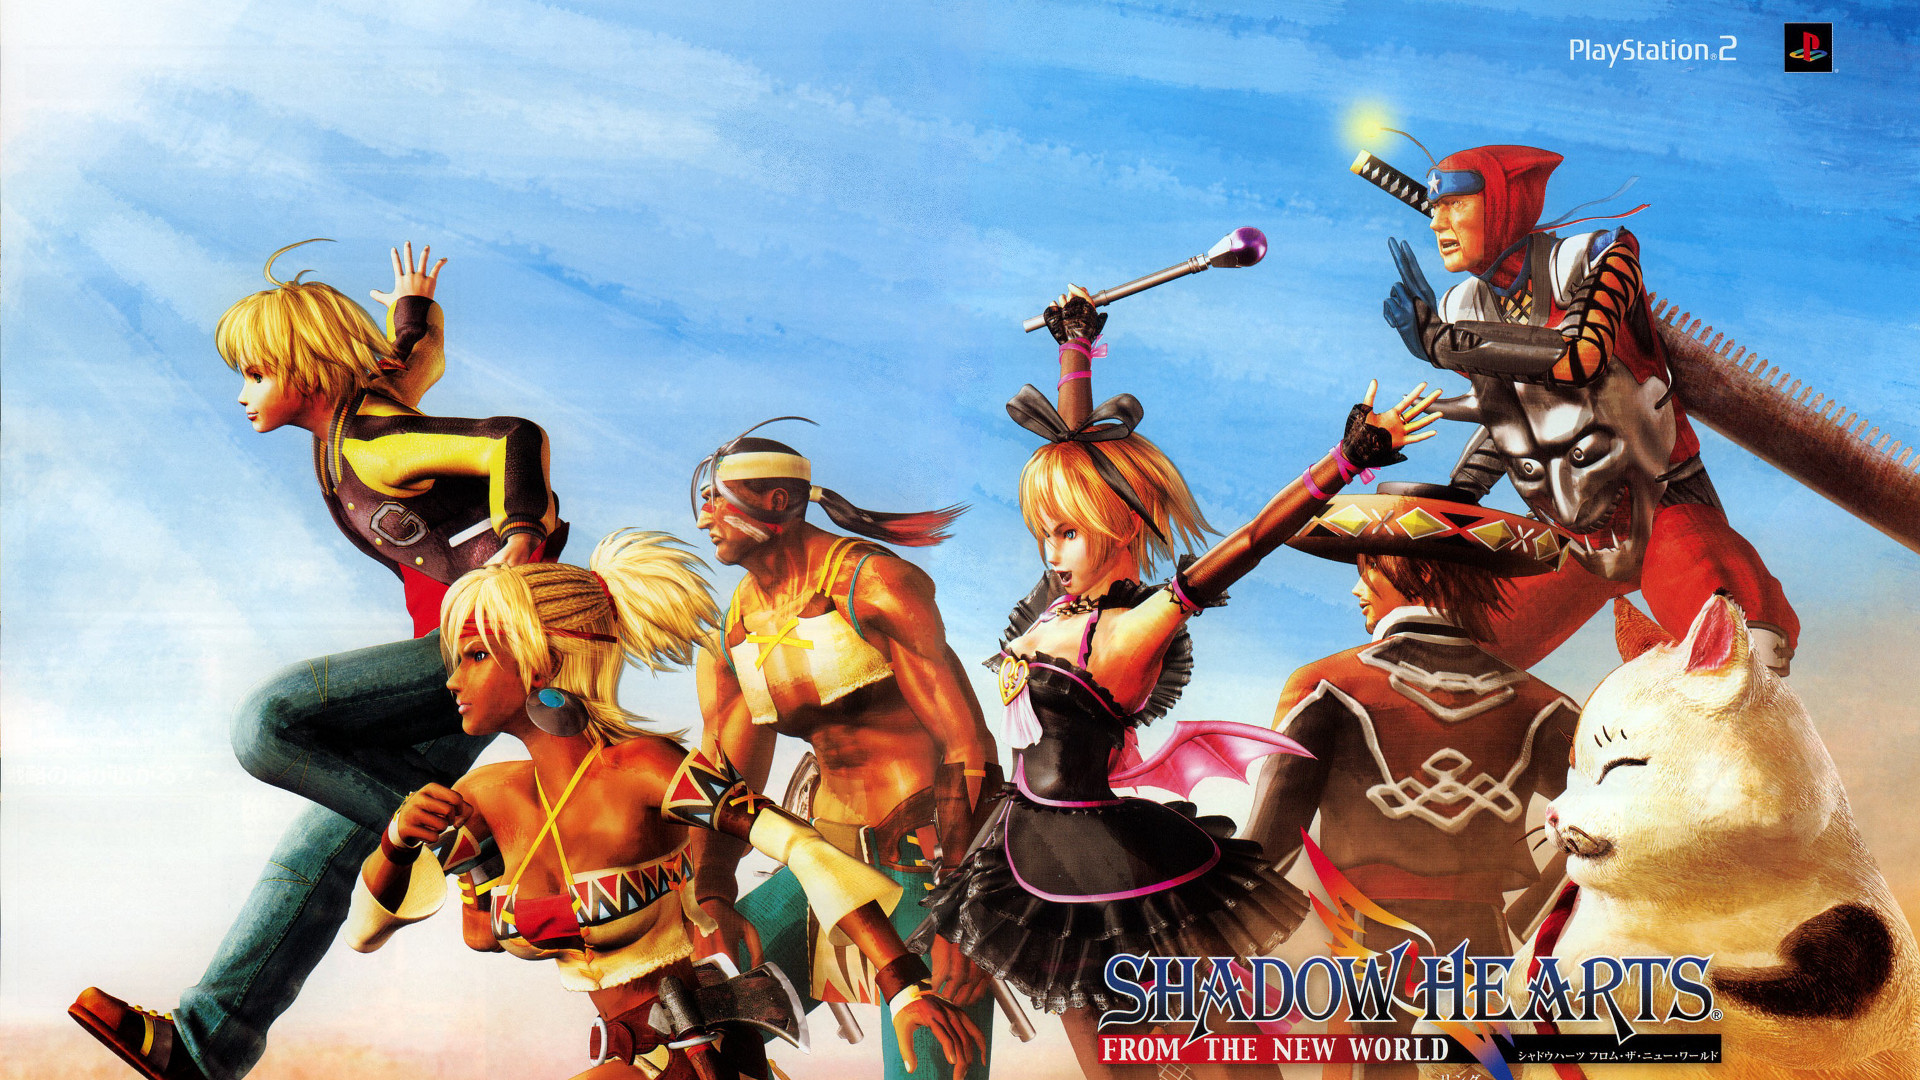 shadow-hearts-from-the-new-world-details-launchbox-games-database